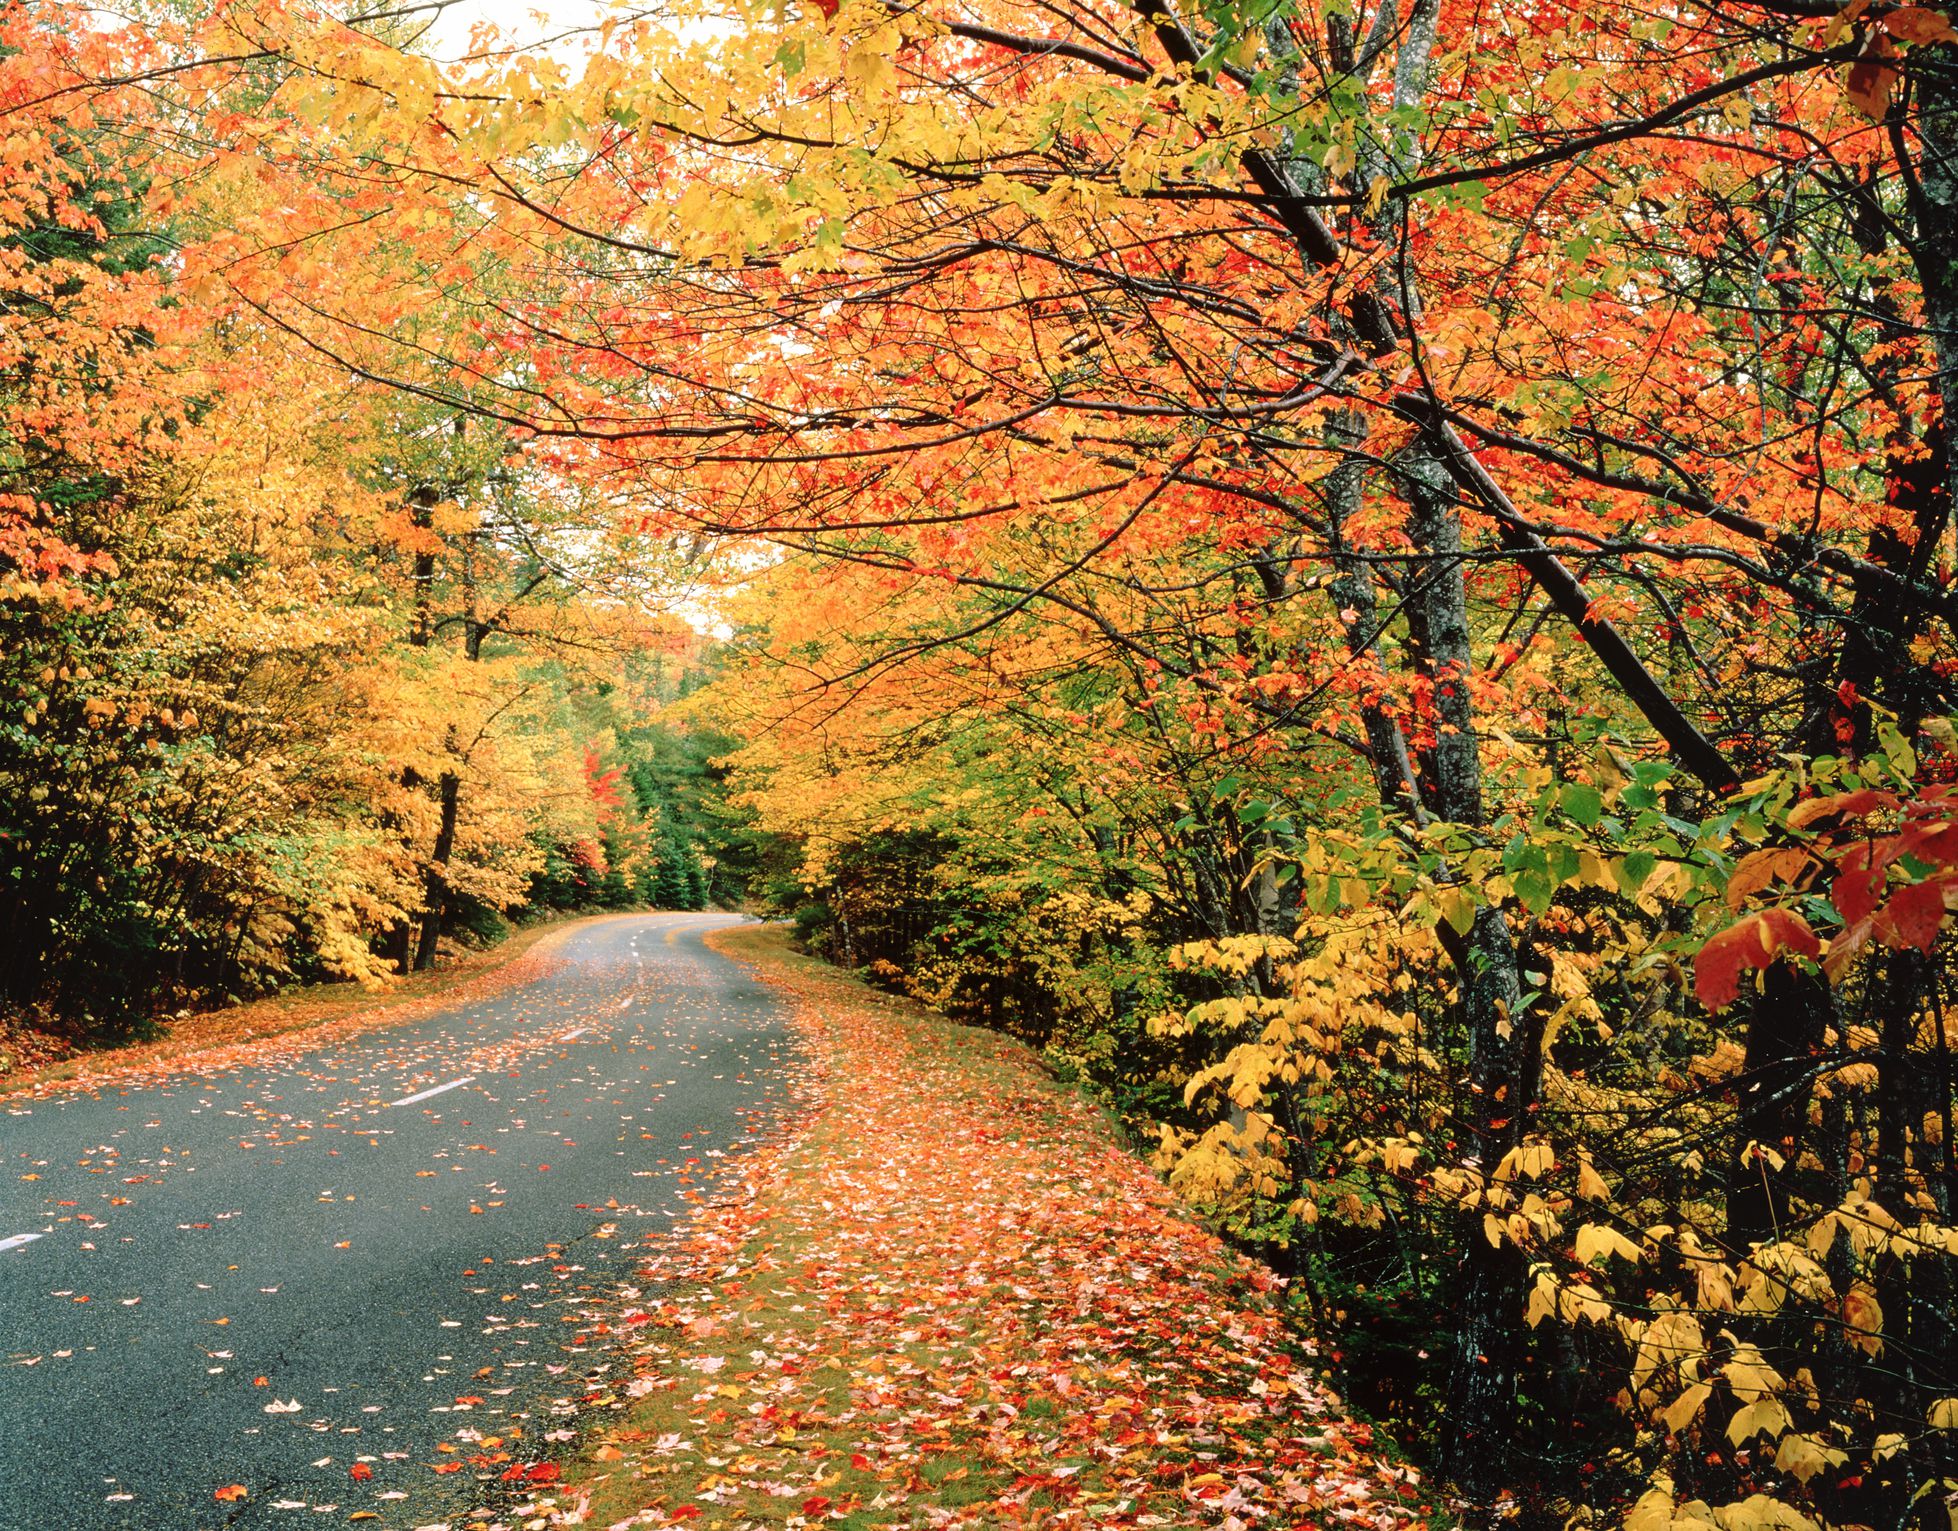 The Best Fall Foliage Destinations in New England